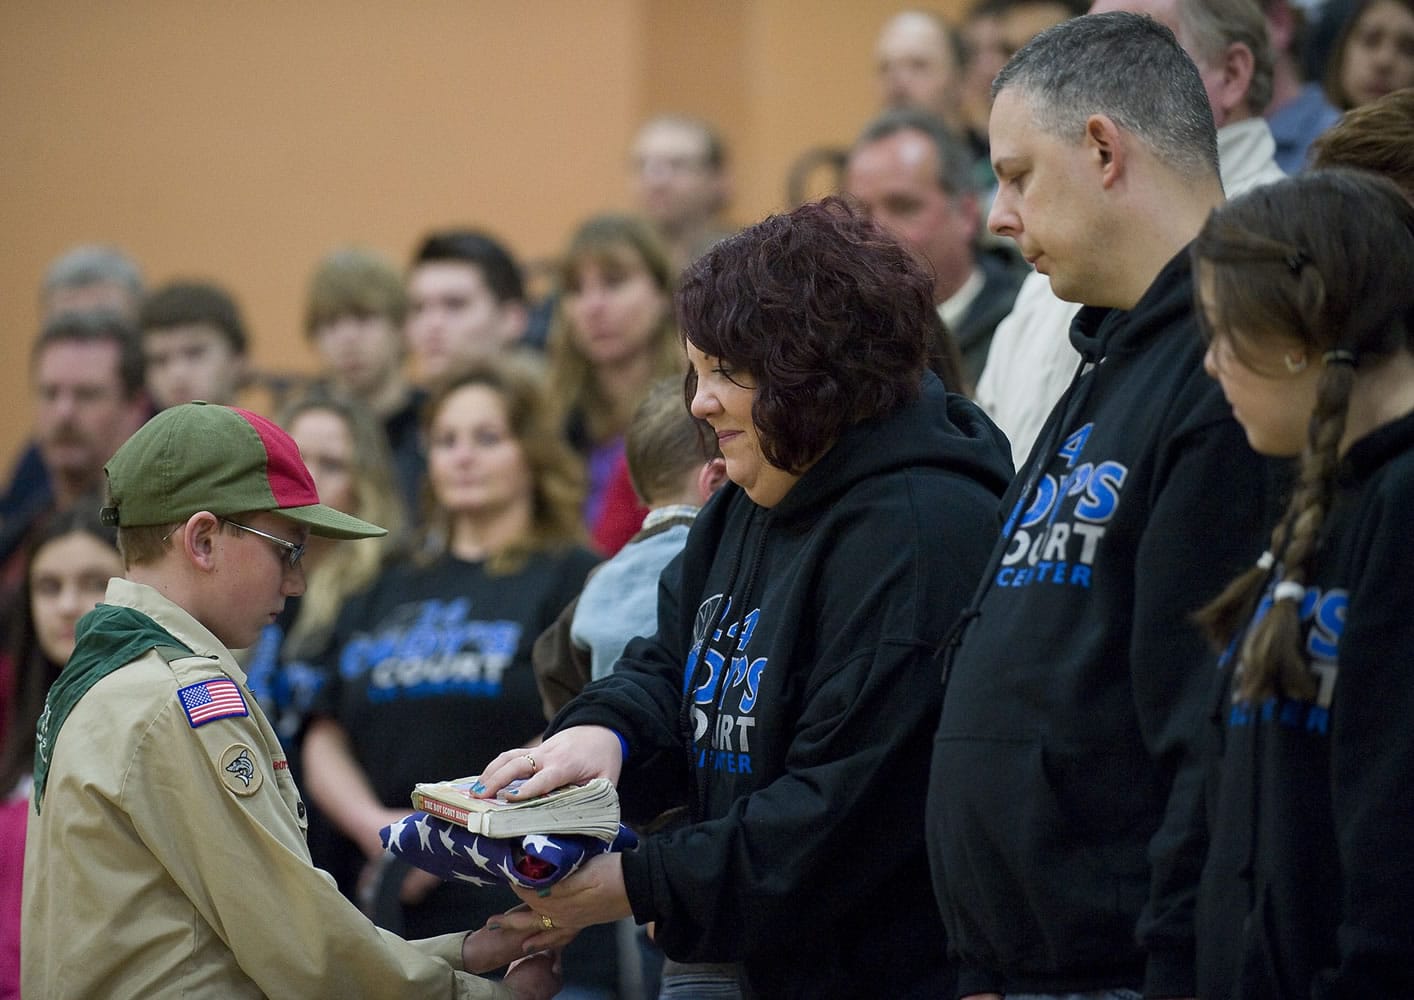 Boy Scout Troop 484 member Scott Brightbill, 13, hands Renee Sherrell, mother of Cody Sherrell, a U.S. flag during a ceremony in Cody's honor Thursday inside the La Center Middle School gym.